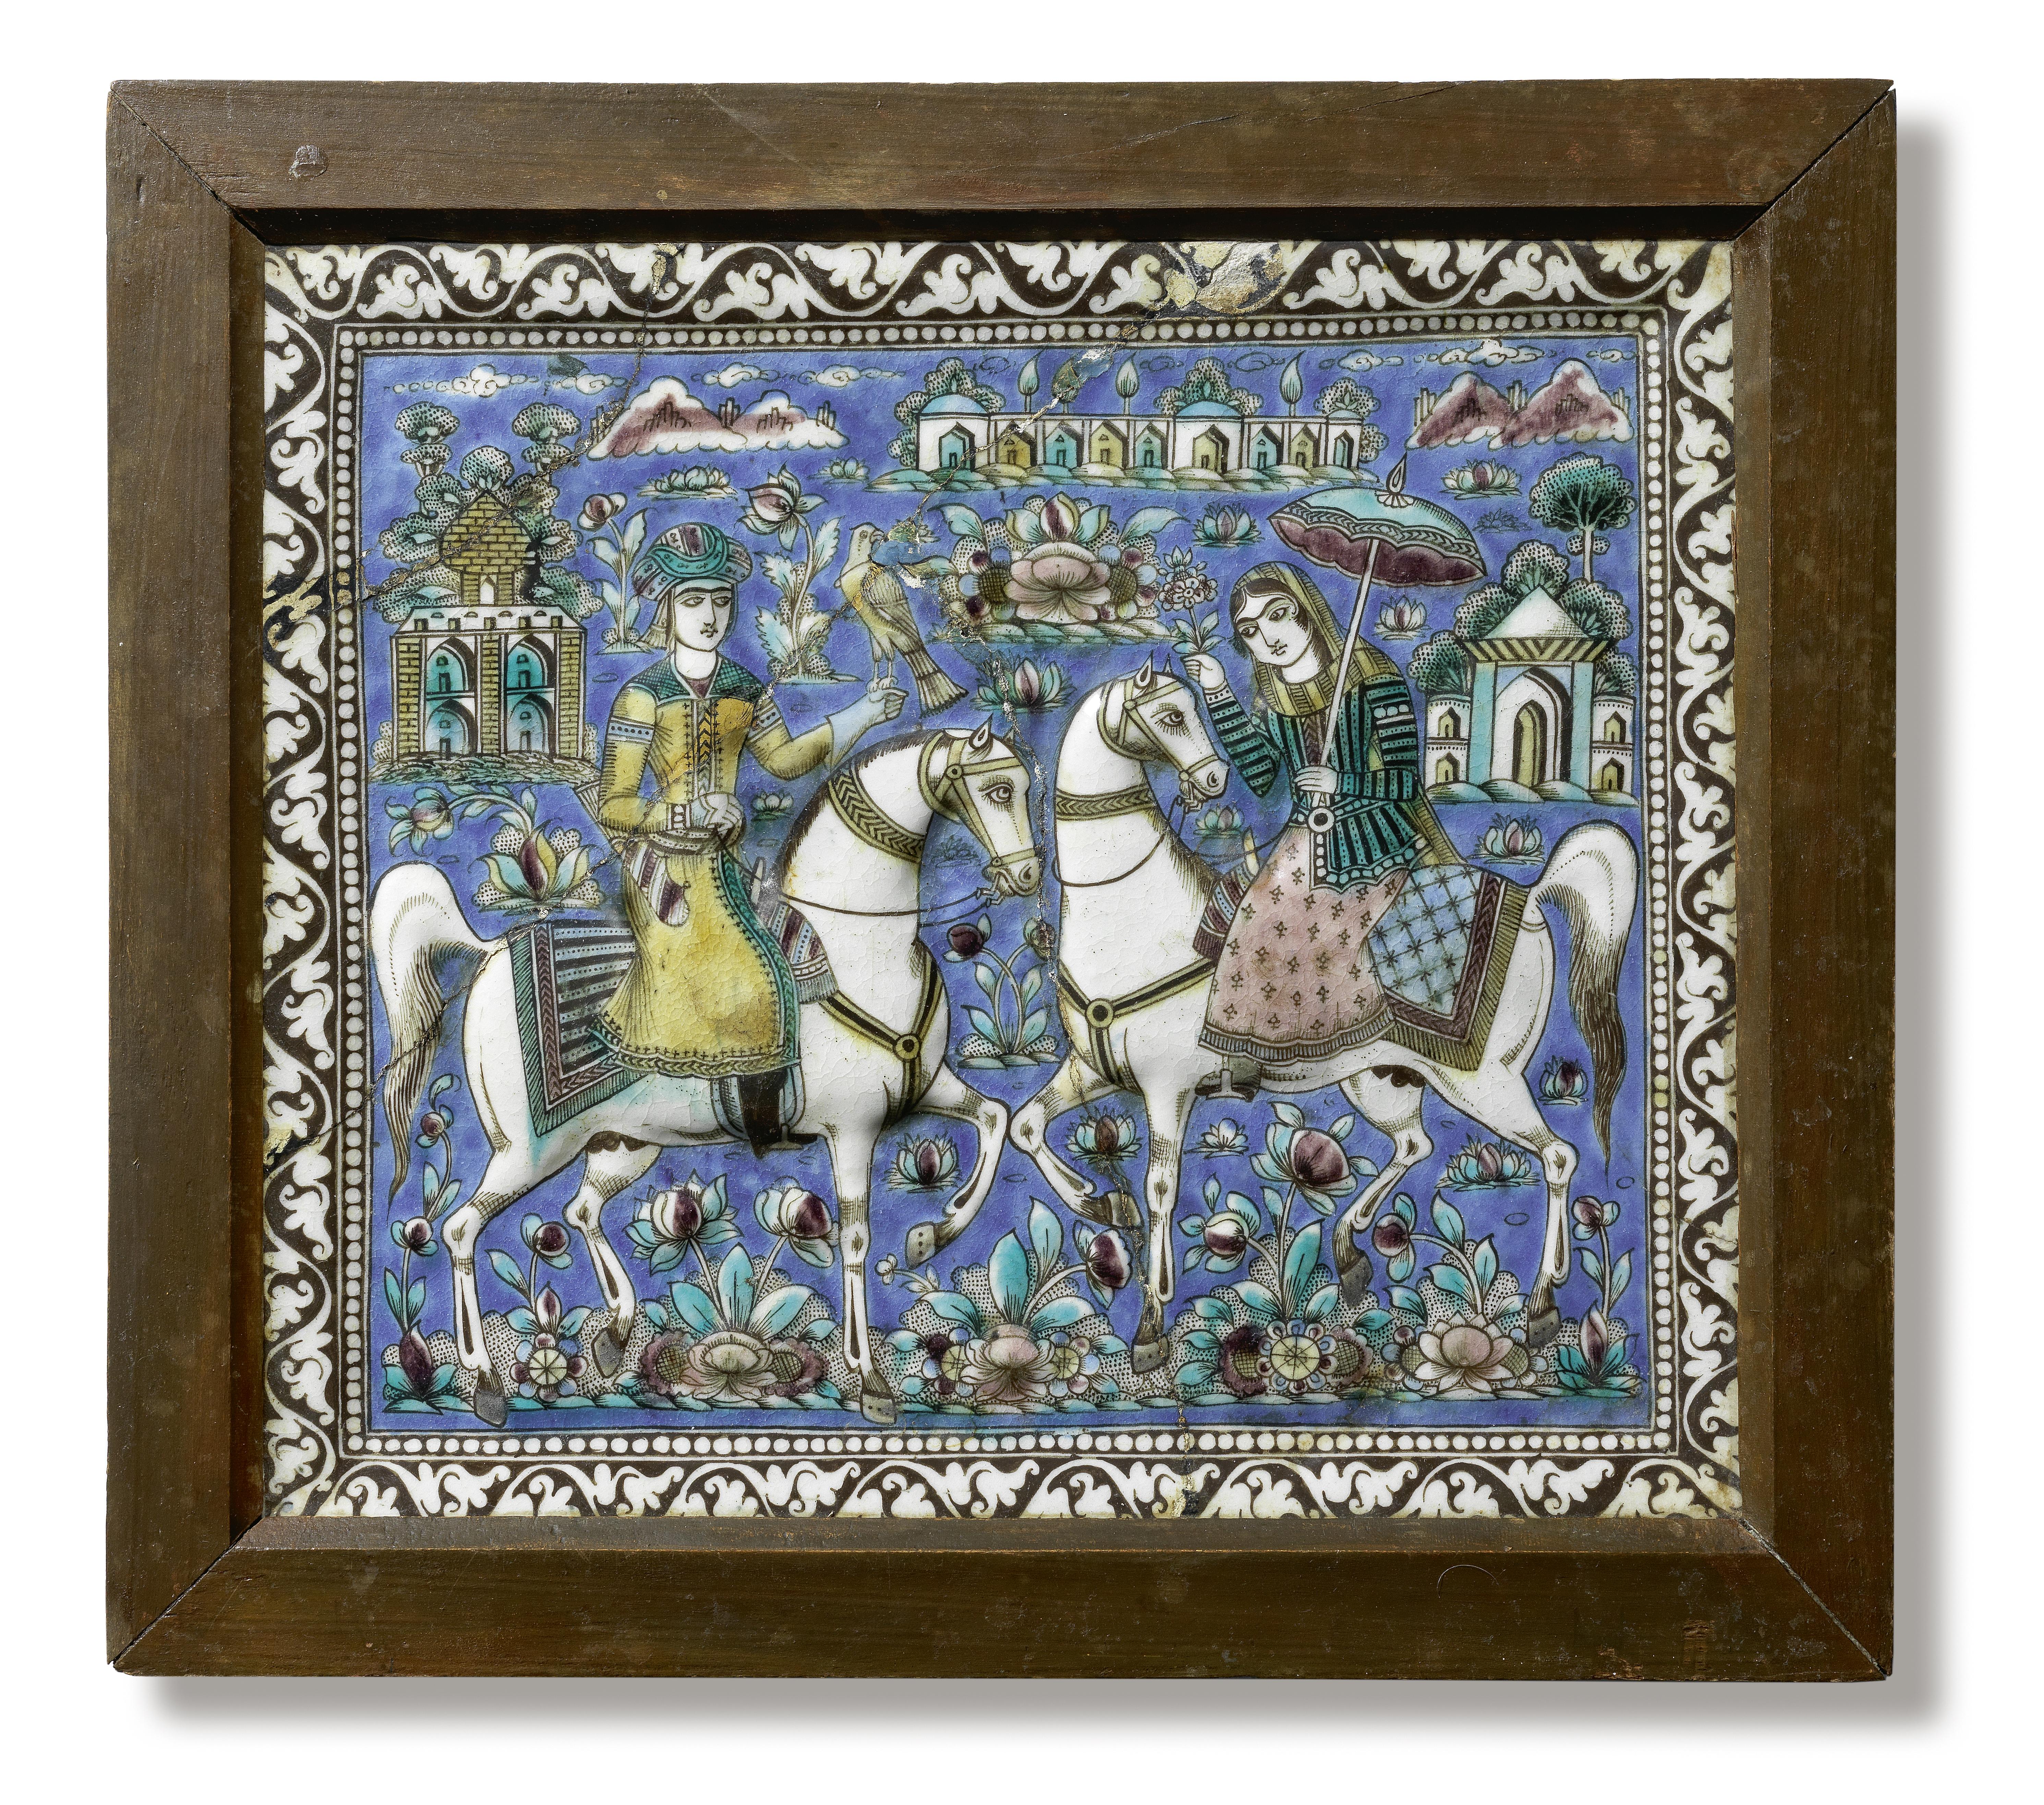 A Qajar moulded pottery tile depicting a prince and a maiden out hawking Persia, circa 1880